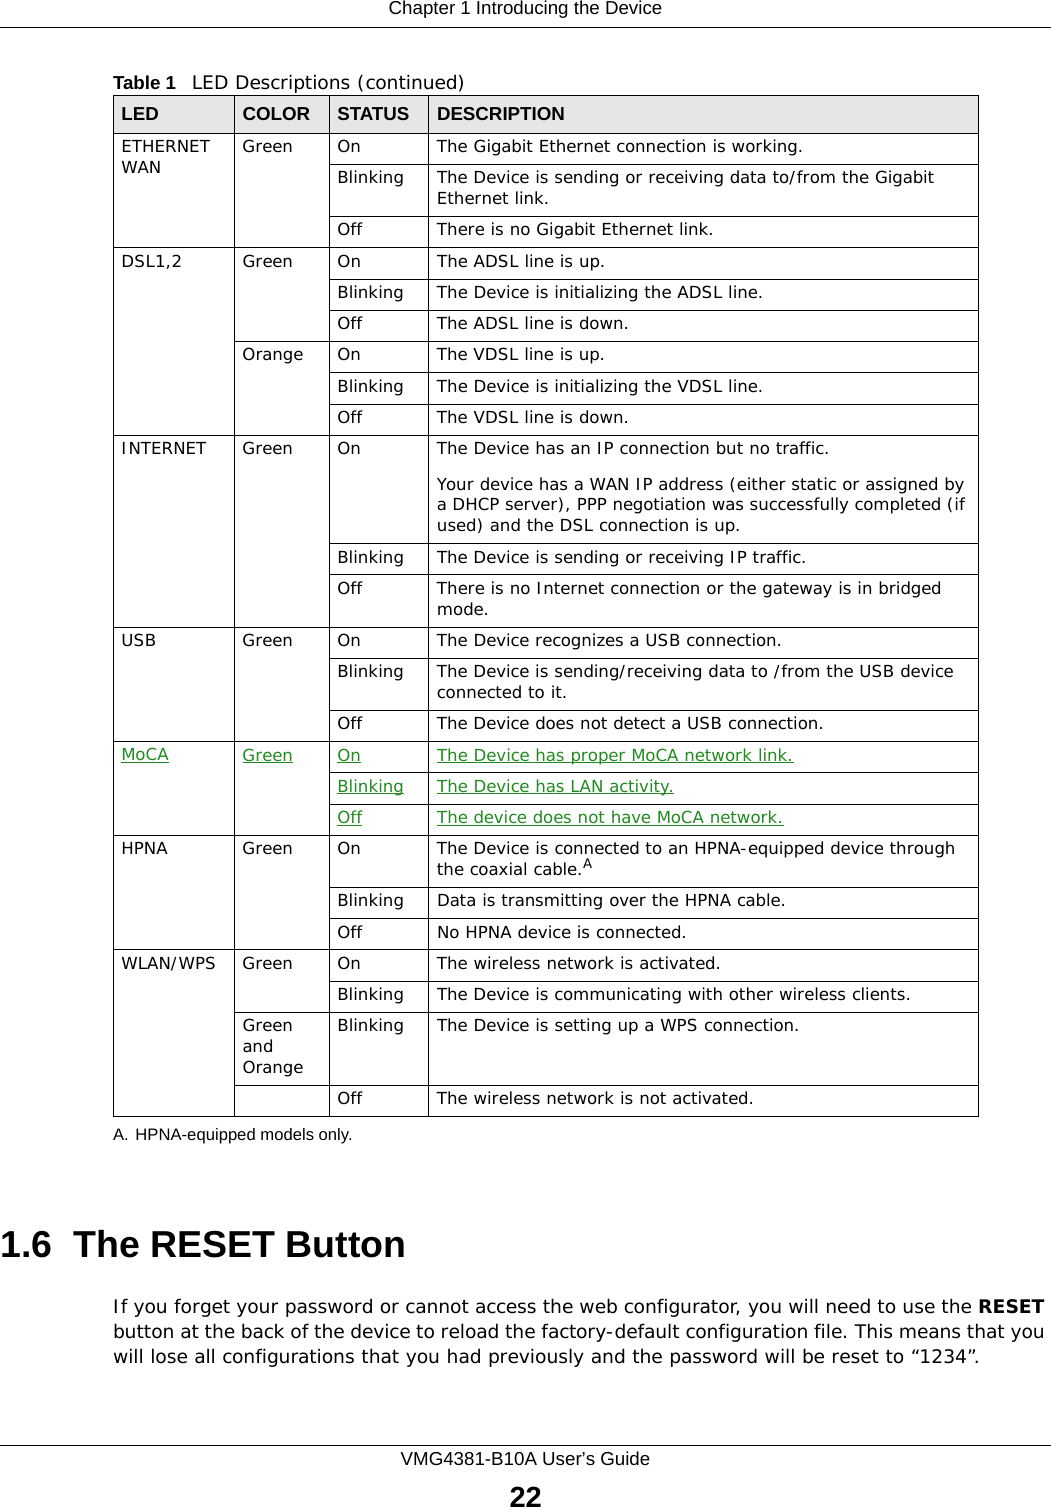 Chapter 1 Introducing the DeviceVMG4381-B10A User’s Guide221.6  The RESET ButtonIf you forget your password or cannot access the web configurator, you will need to use the RESET button at the back of the device to reload the factory-default configuration file. This means that you will lose all configurations that you had previously and the password will be reset to “1234”. ETHERNET WAN Green On The Gigabit Ethernet connection is working.Blinking The Device is sending or receiving data to/from the Gigabit Ethernet link.Off There is no Gigabit Ethernet link.DSL1,2 Green On The ADSL line is up.Blinking The Device is initializing the ADSL line.Off The ADSL line is down.Orange On The VDSL line is up.Blinking The Device is initializing the VDSL line.Off The VDSL line is down.INTERNET Green On The Device has an IP connection but no traffic.Your device has a WAN IP address (either static or assigned by a DHCP server), PPP negotiation was successfully completed (if used) and the DSL connection is up.Blinking The Device is sending or receiving IP traffic.Off There is no Internet connection or the gateway is in bridged mode.USB Green On The Device recognizes a USB connection.Blinking The Device is sending/receiving data to /from the USB device connected to it.Off The Device does not detect a USB connection.MoCA Green On The Device has proper MoCA network link.Blinking The Device has LAN activity.Off The device does not have MoCA network.HPNA Green On The Device is connected to an HPNA-equipped device through the coaxial cable.ABlinking Data is transmitting over the HPNA cable.Off No HPNA device is connected.WLAN/WPS Green On The wireless network is activated.Blinking The Device is communicating with other wireless clients.Green and OrangeBlinking The Device is setting up a WPS connection.Off The wireless network is not activated.A. HPNA-equipped models only.Table 1   LED Descriptions (continued)LED COLOR STATUS DESCRIPTION